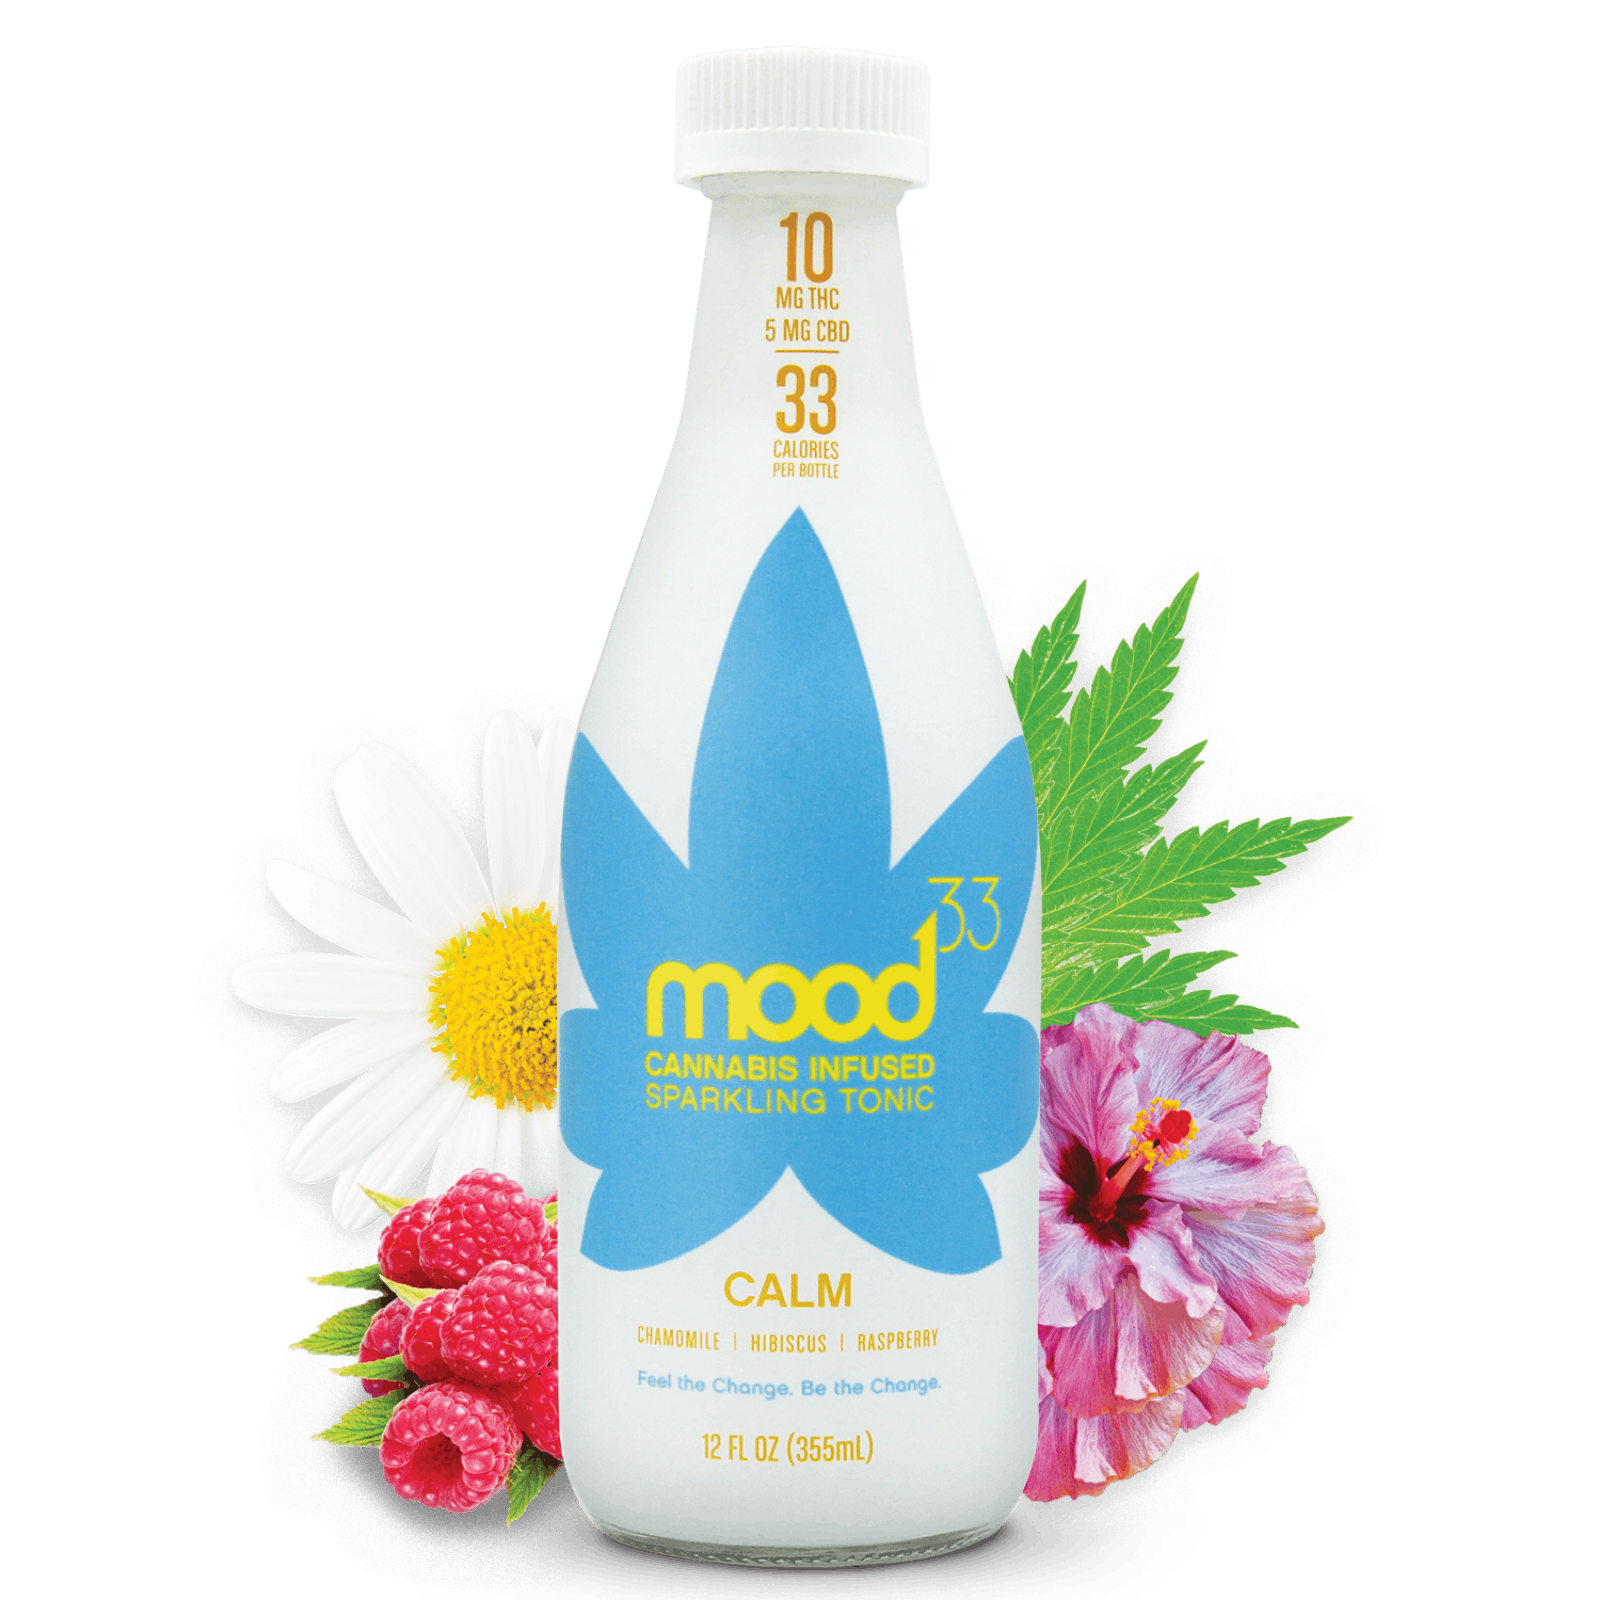 Mood33 - Calm Cannabis Infused Sparkling Tonic